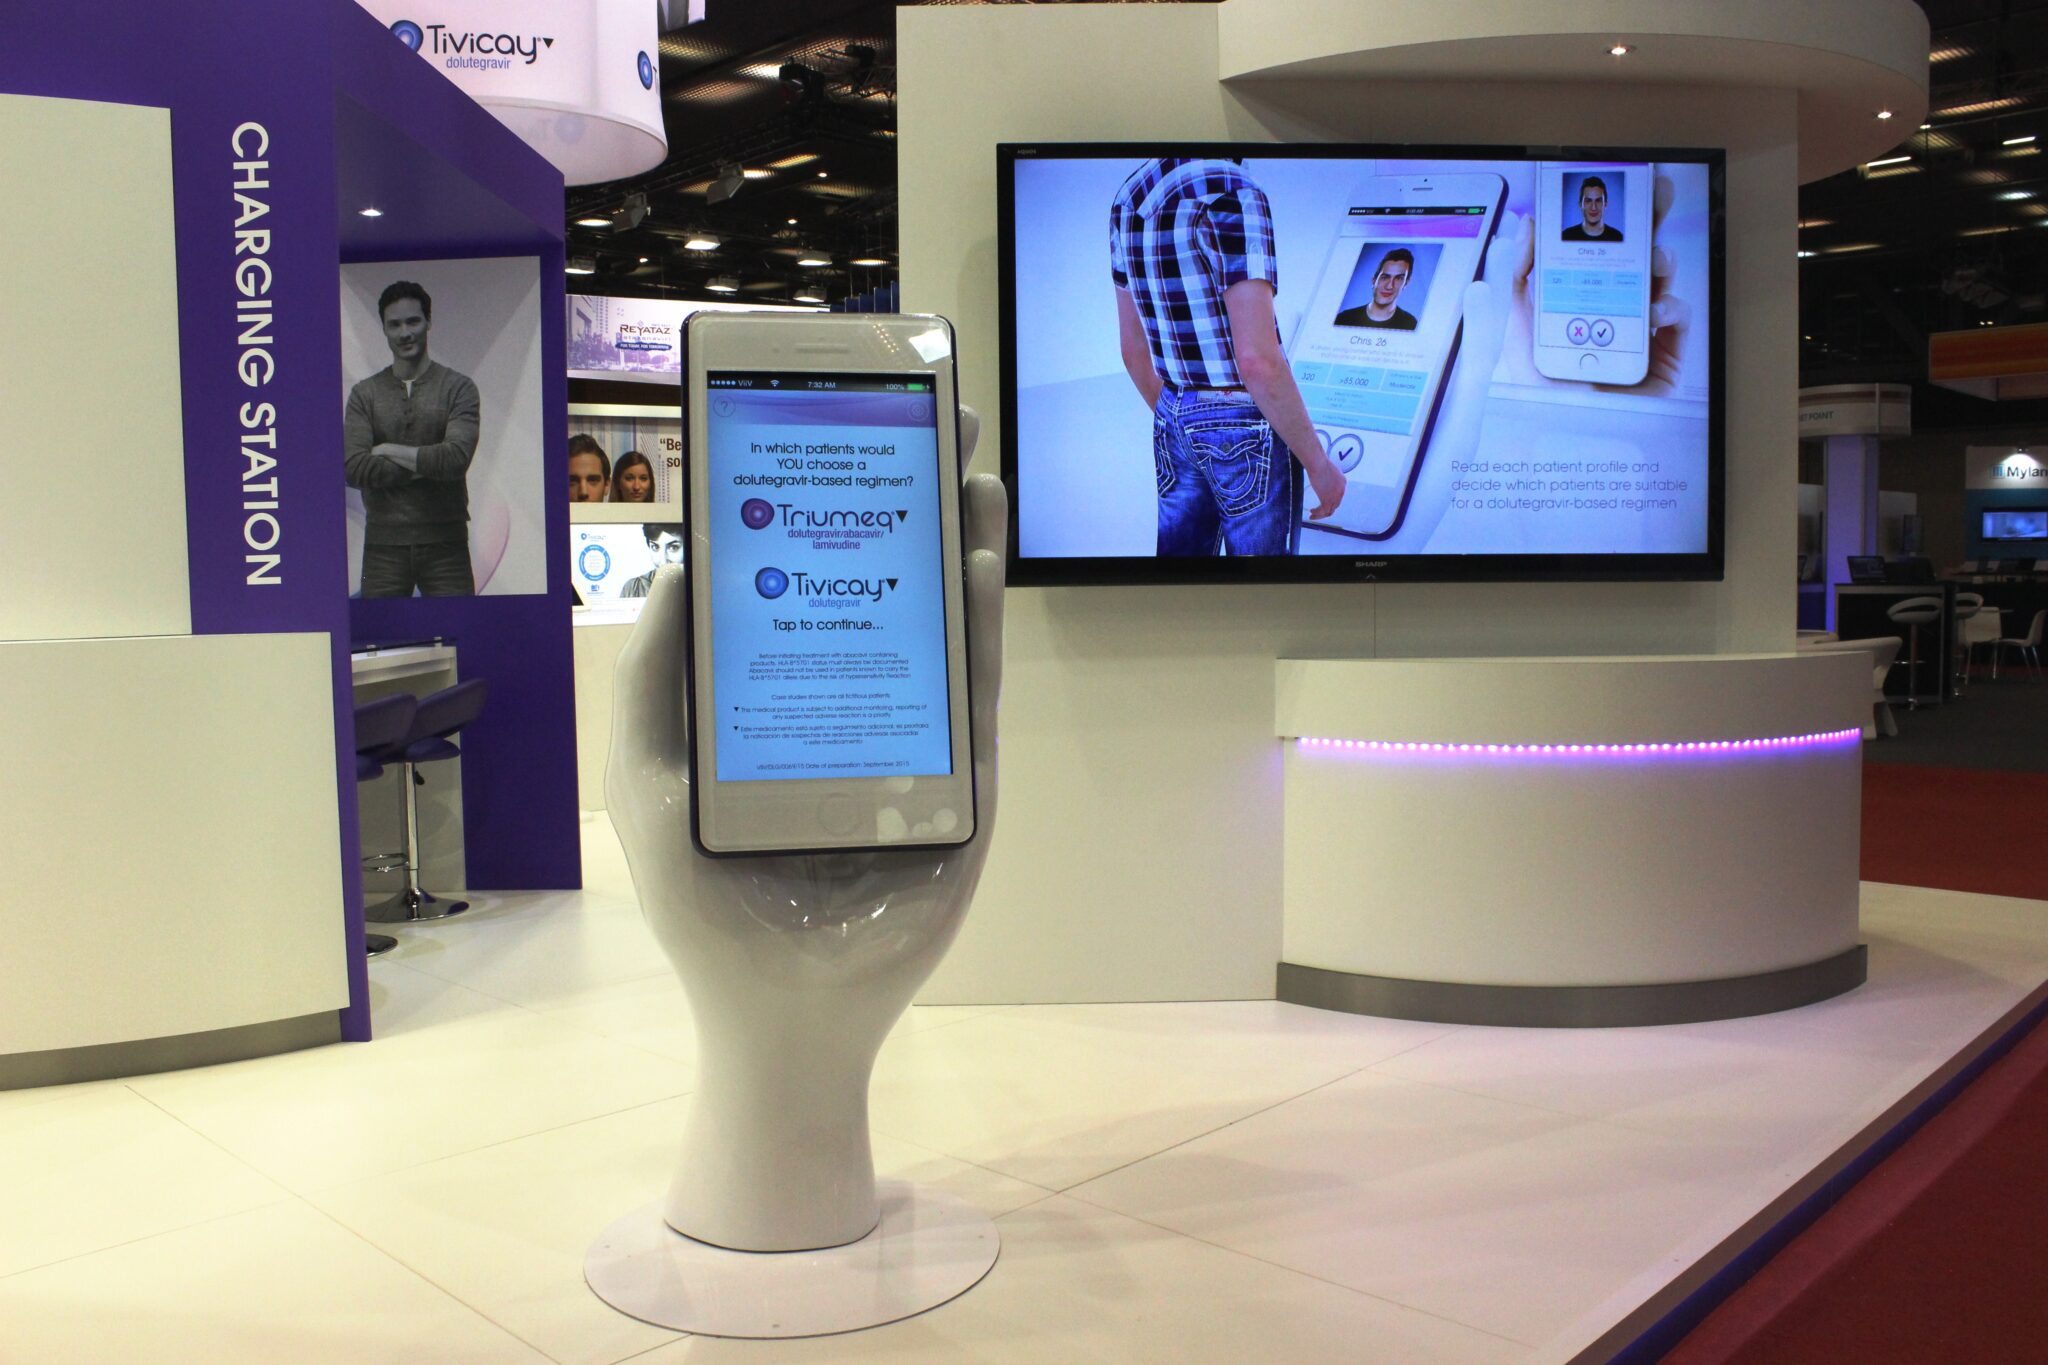 Customized Digital Experiences For Trade Show Attendees